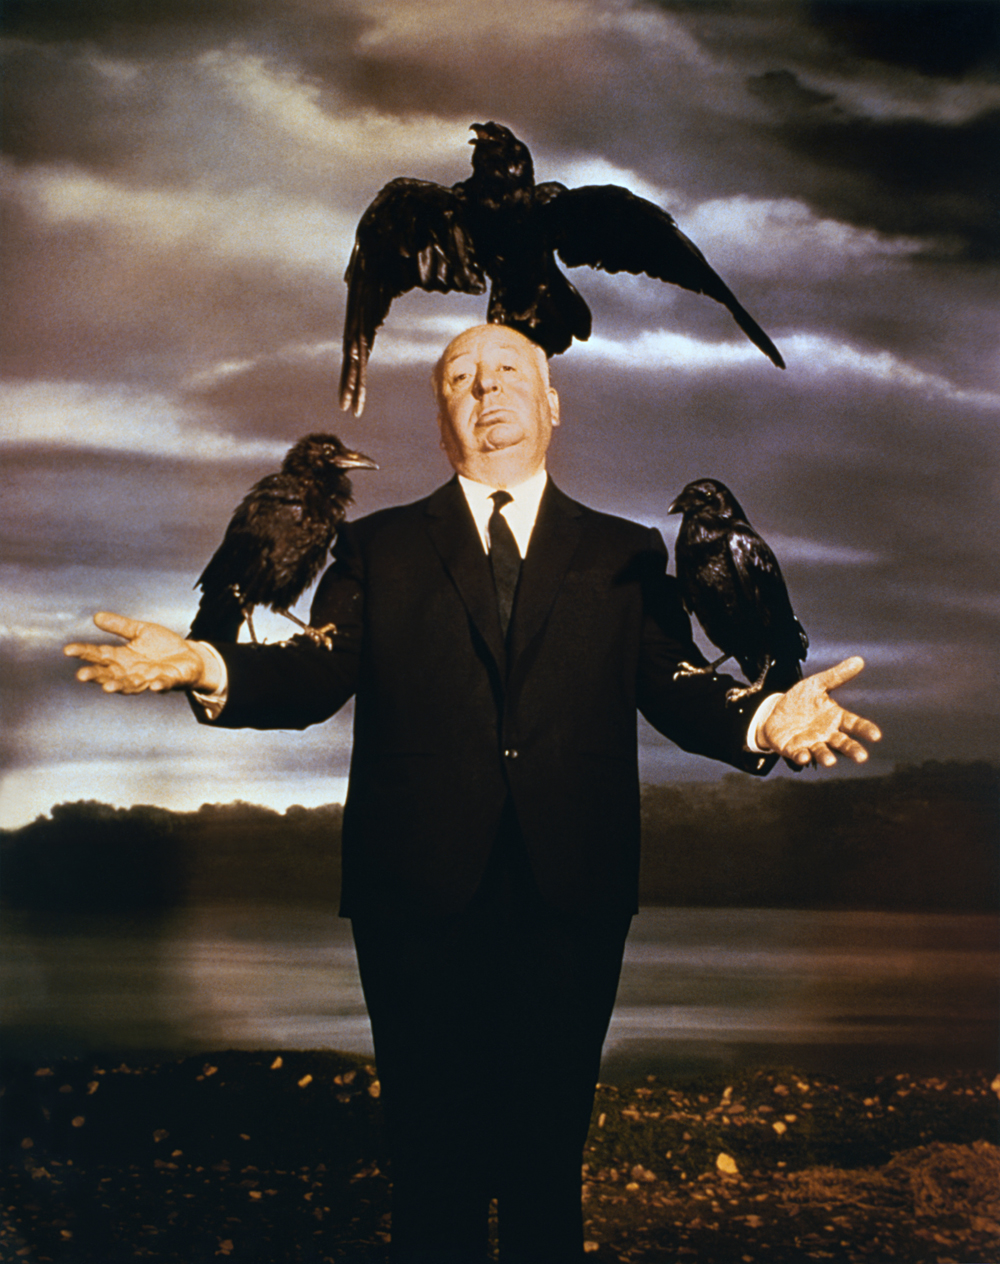 hitchcock-and-the-birds-corbis-large.jpg